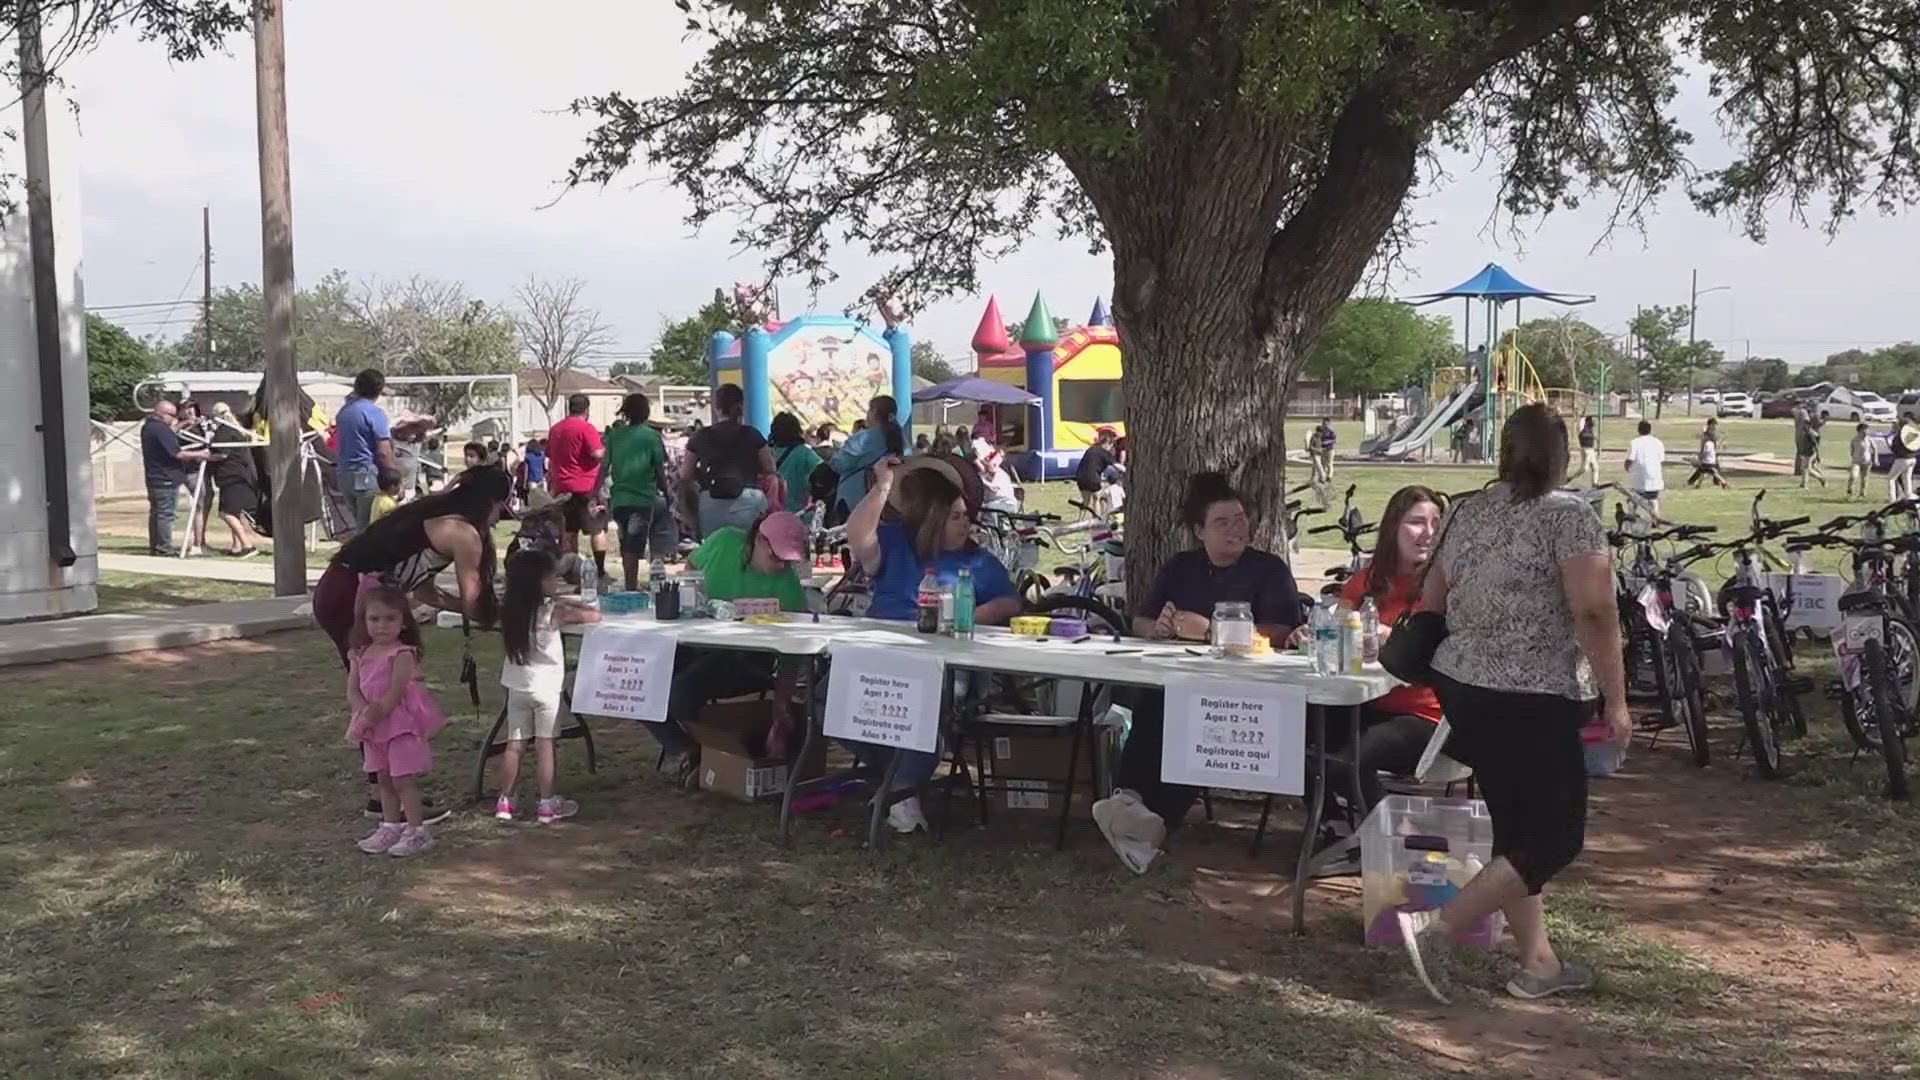 The Hispanic Cultural Center of Midland, the Midland Boys and Girls Club and the West Texas Radio Group got together to celebrate the day with children of all ages.